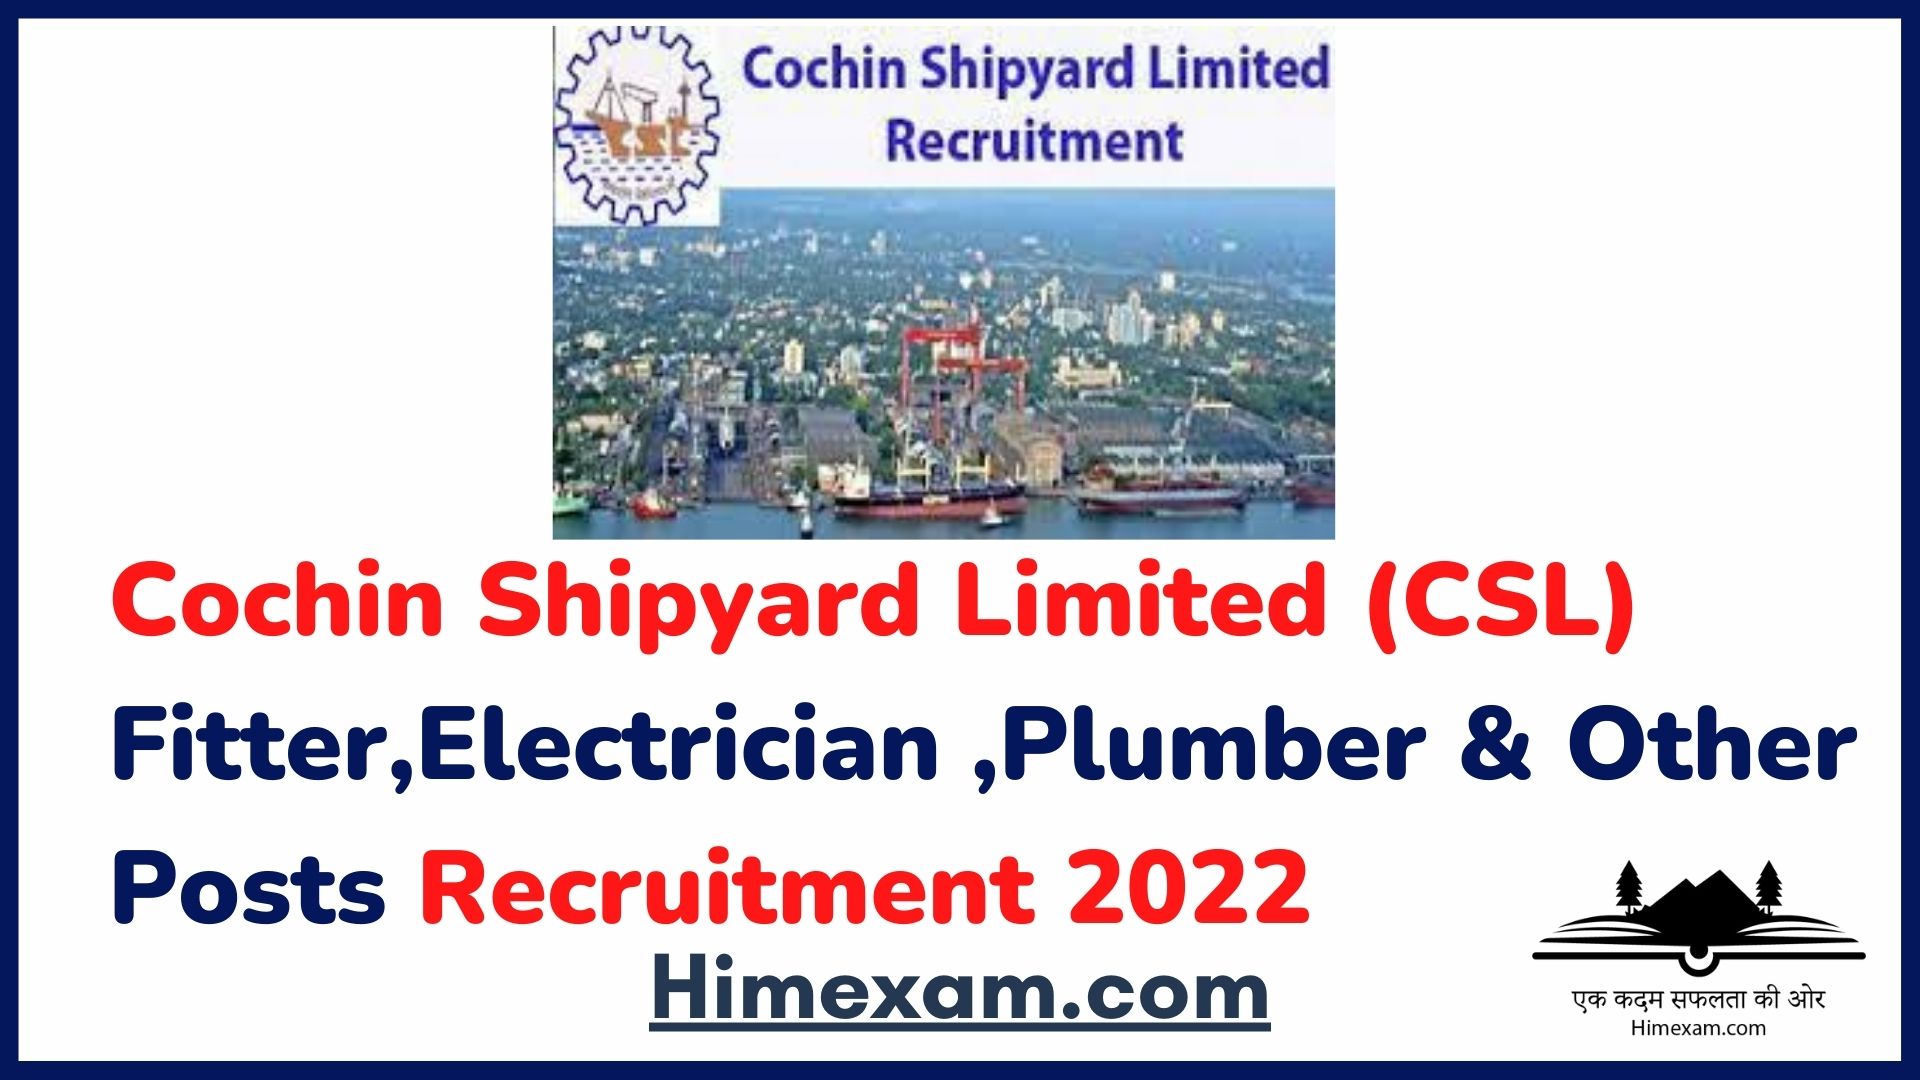 Cochin Shipyard Limited (CSL) Fitter,Electrician ,Plumber & Other Posts Recruitment 2022